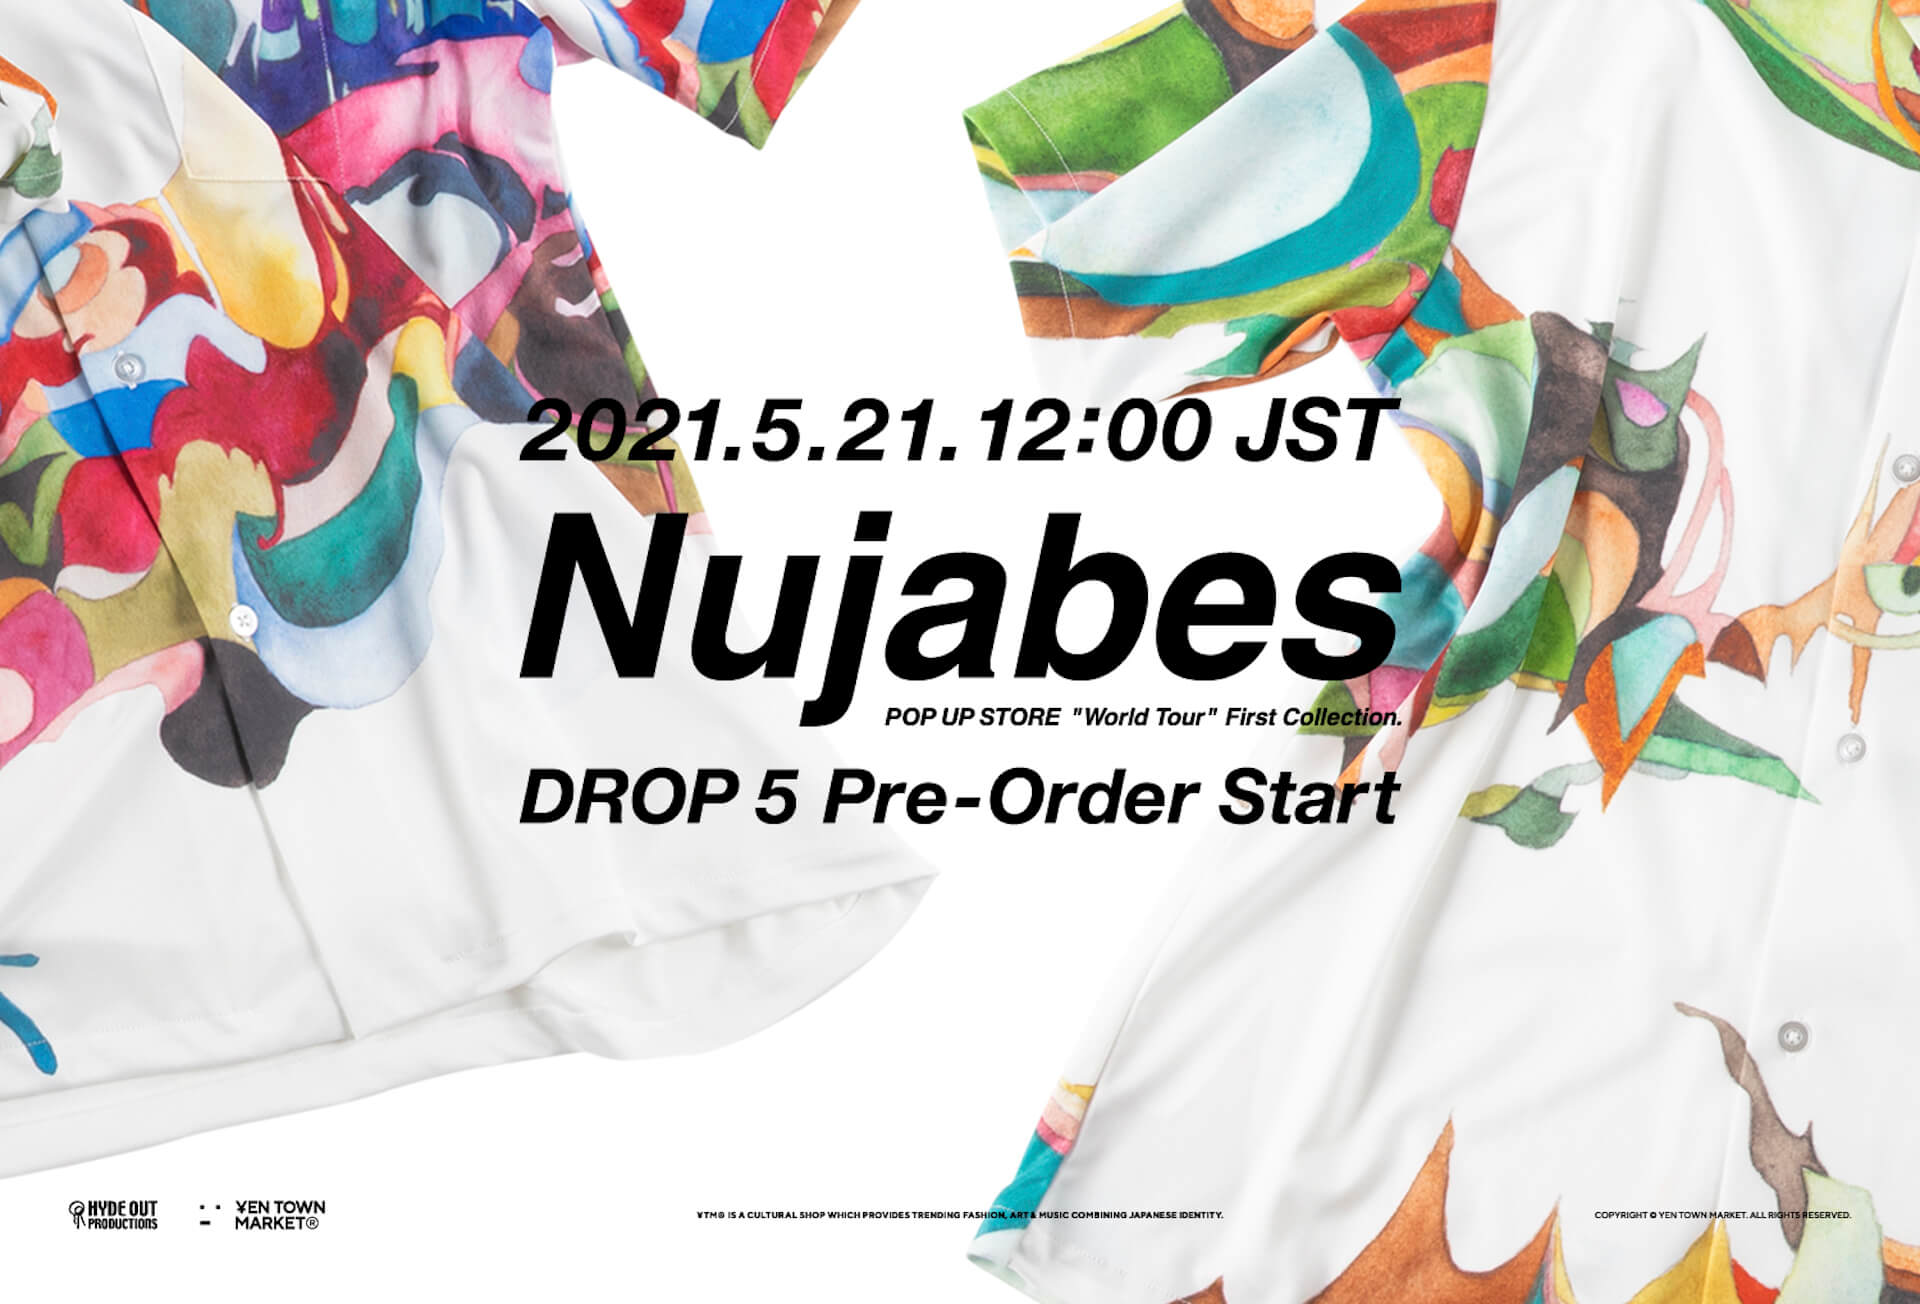 Nujabesのオフィシャルポップアップ＜Nujabes Official Pop Up First Collection＞もクライマックスに突入！最新作「Drop 5」の受注が本日より開始 life210521_nujabes-210521_1